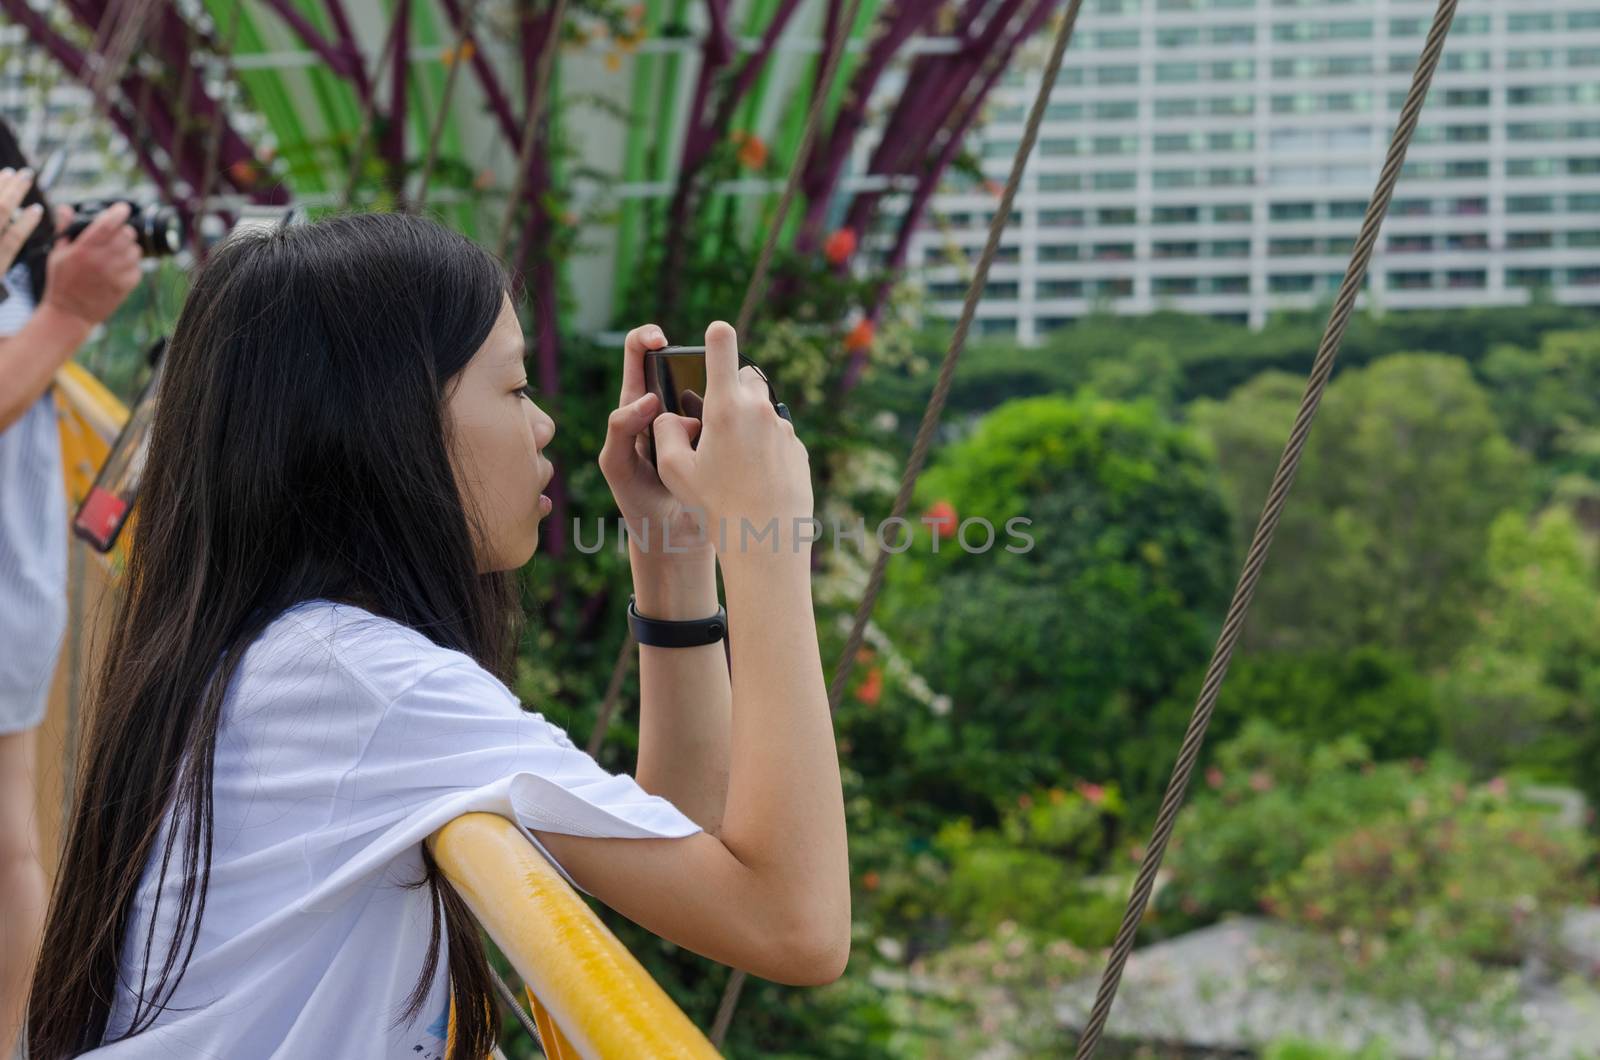 A young girl is using a mobile phone to take pictures at Gardens by the Bay, Singapore.